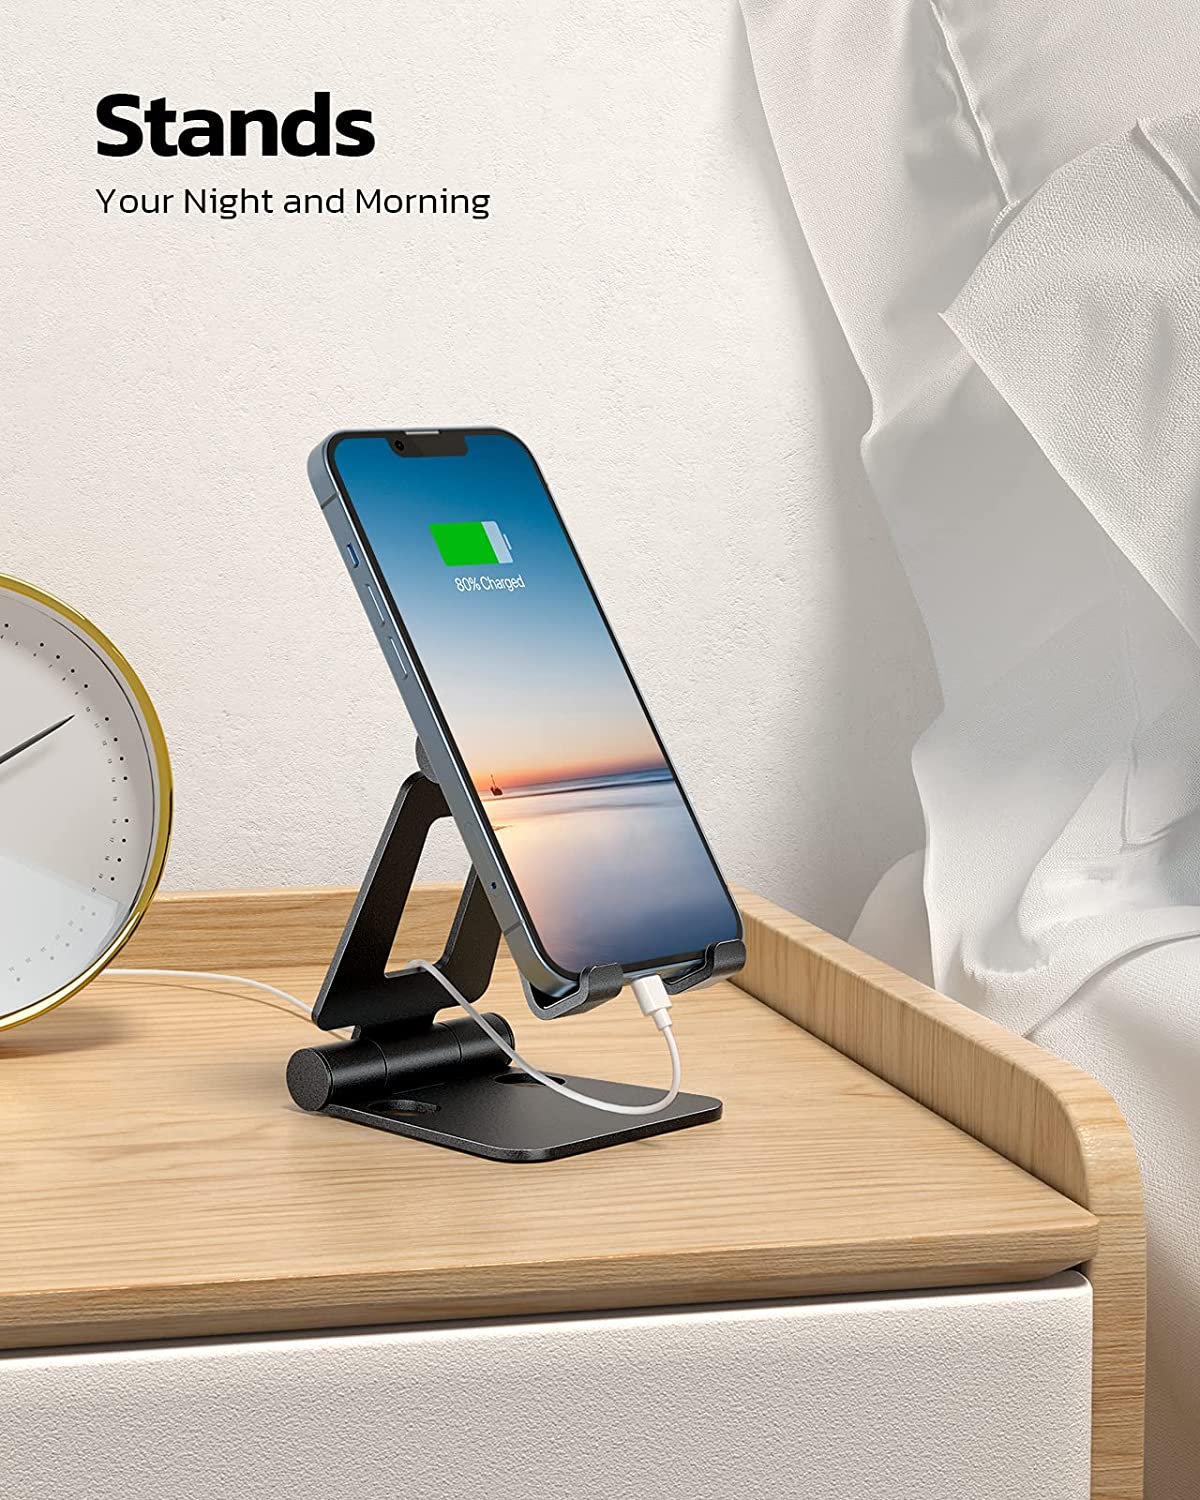 A4 Cell Phone Stand - Nulaxy